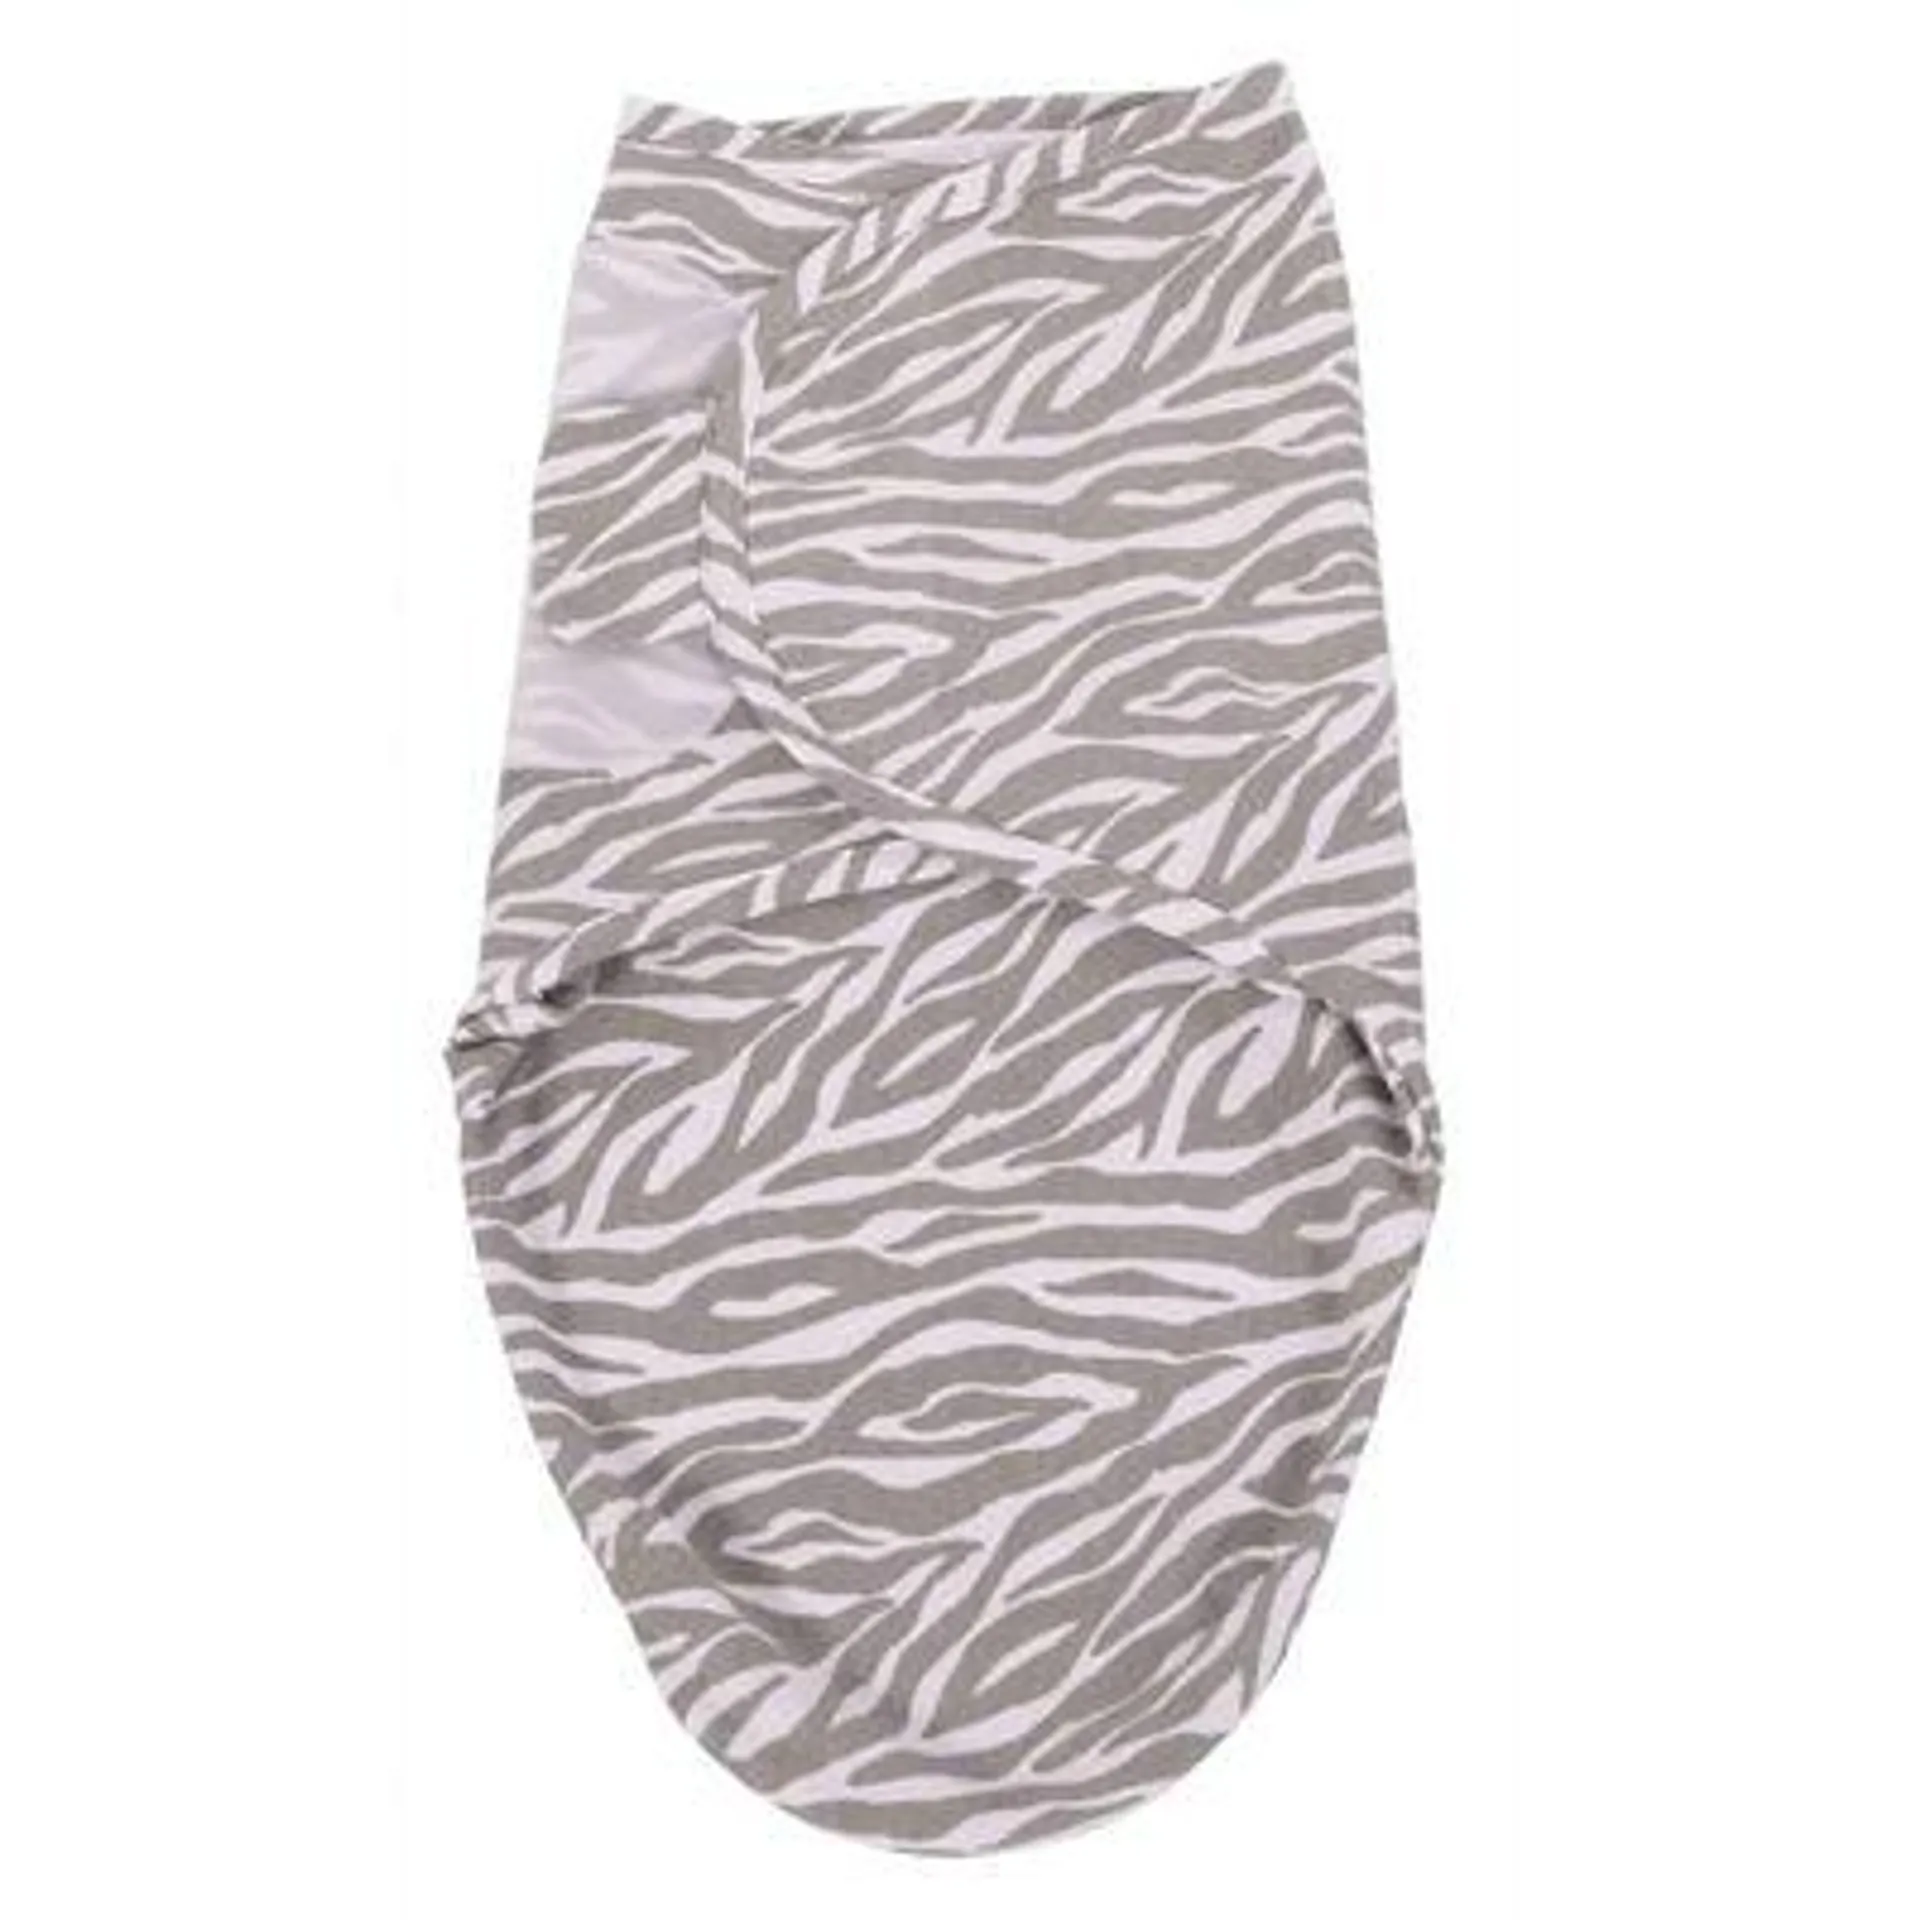 Bo Jungle Wrap Swaddling Blanket Grey and White Tiger S